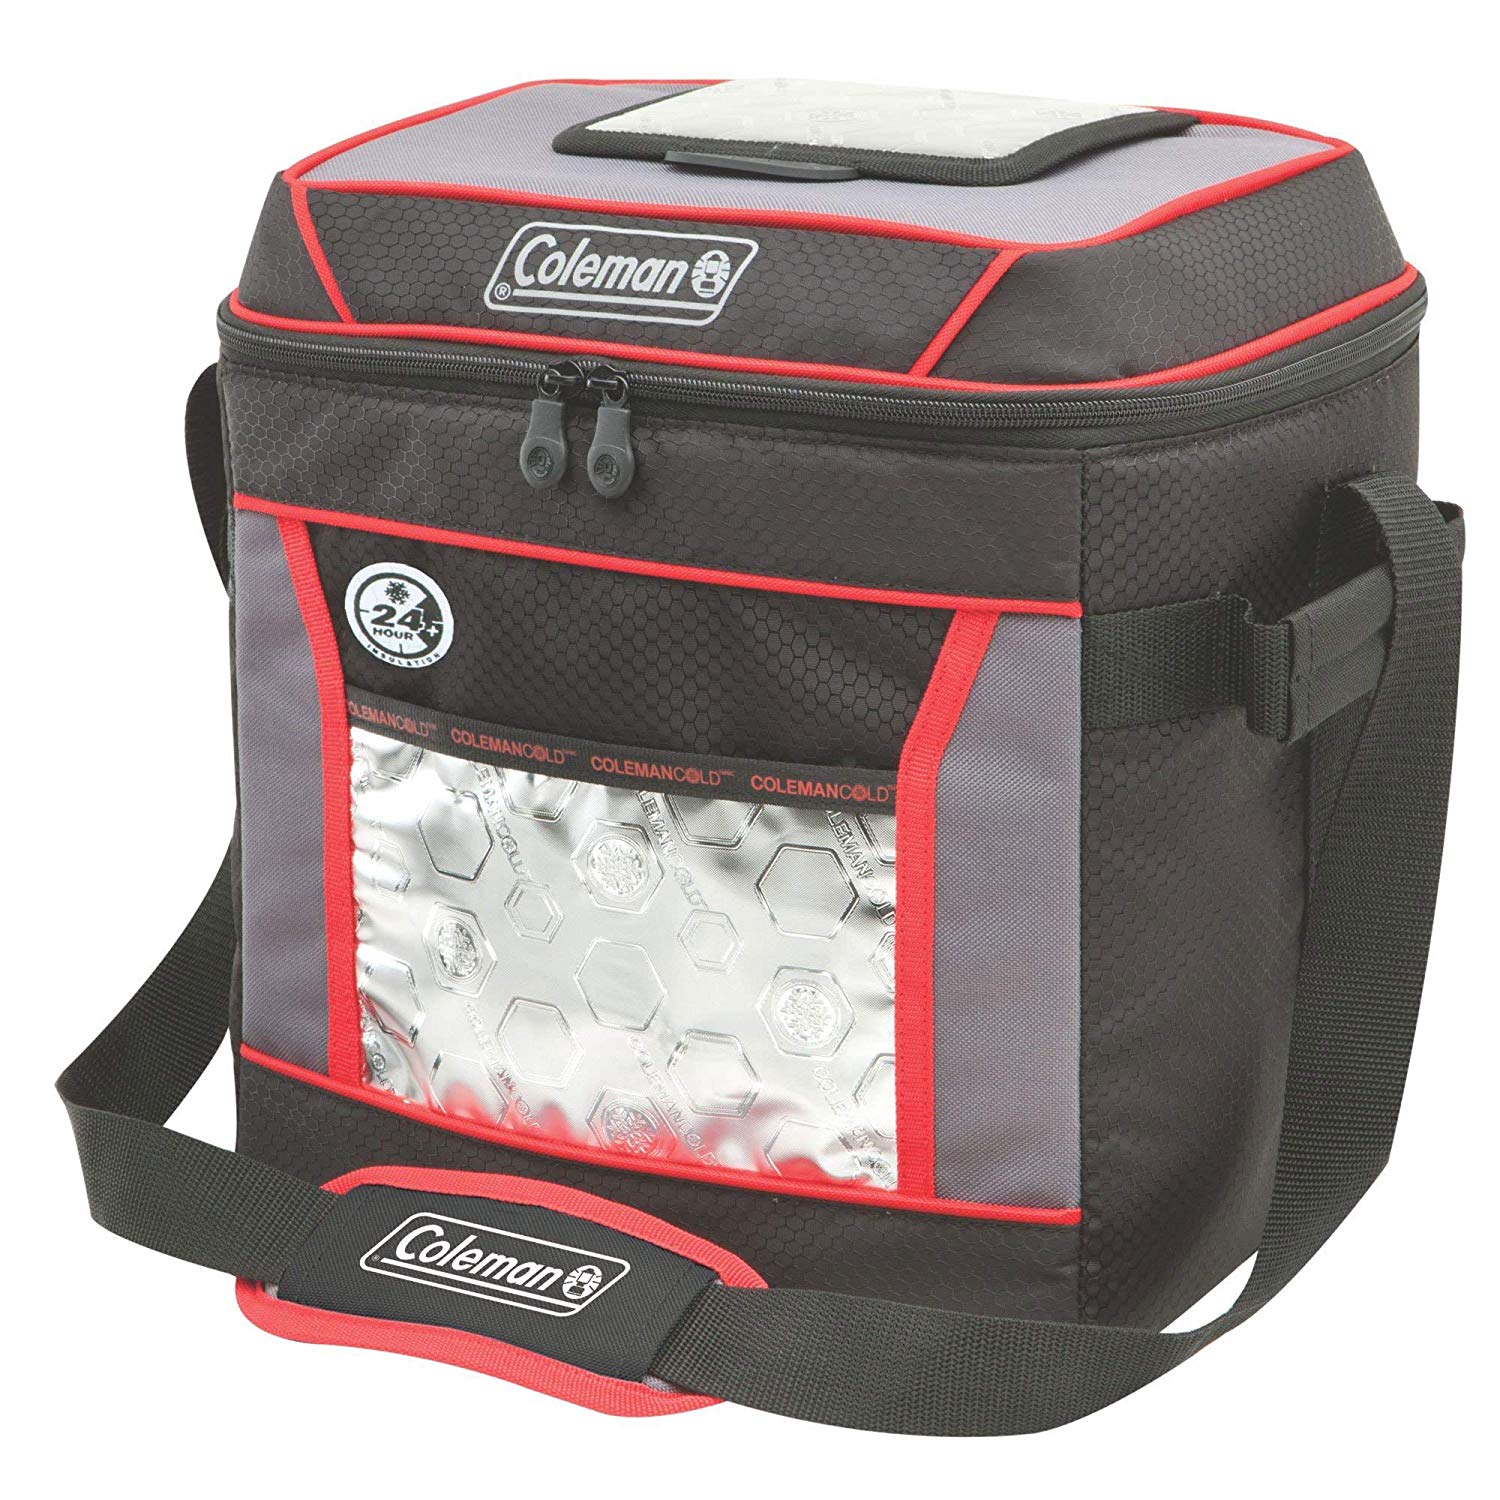 Top 10 Best Coleman Coolers in 2022 Reviews Top Best Pro Review